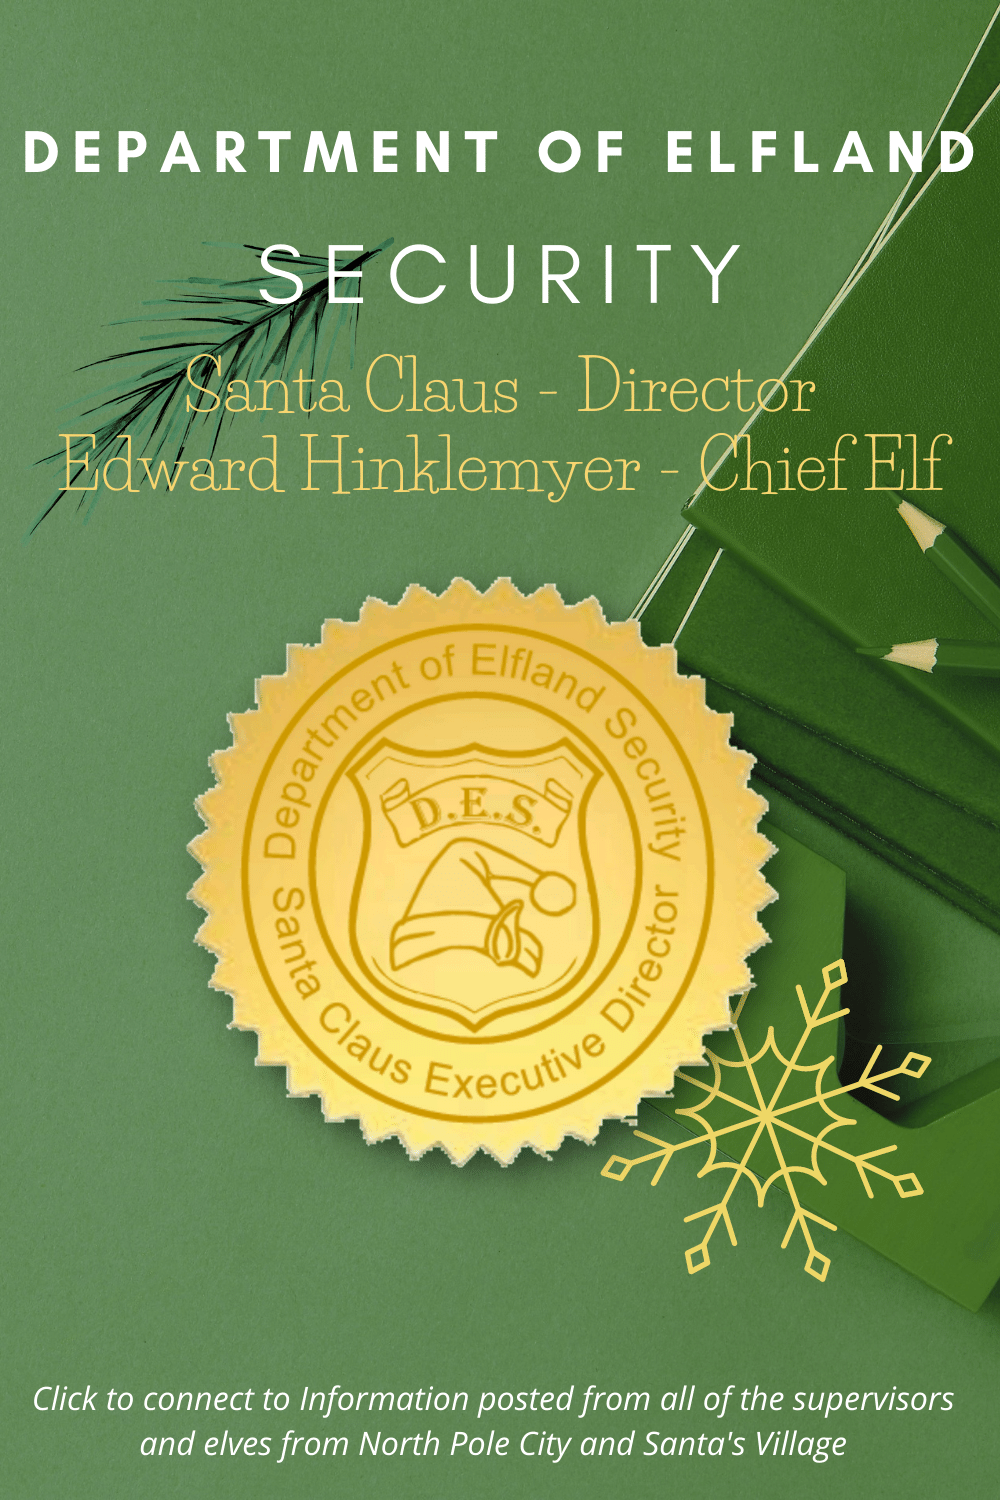 Welcome to the Department of Elfland Security